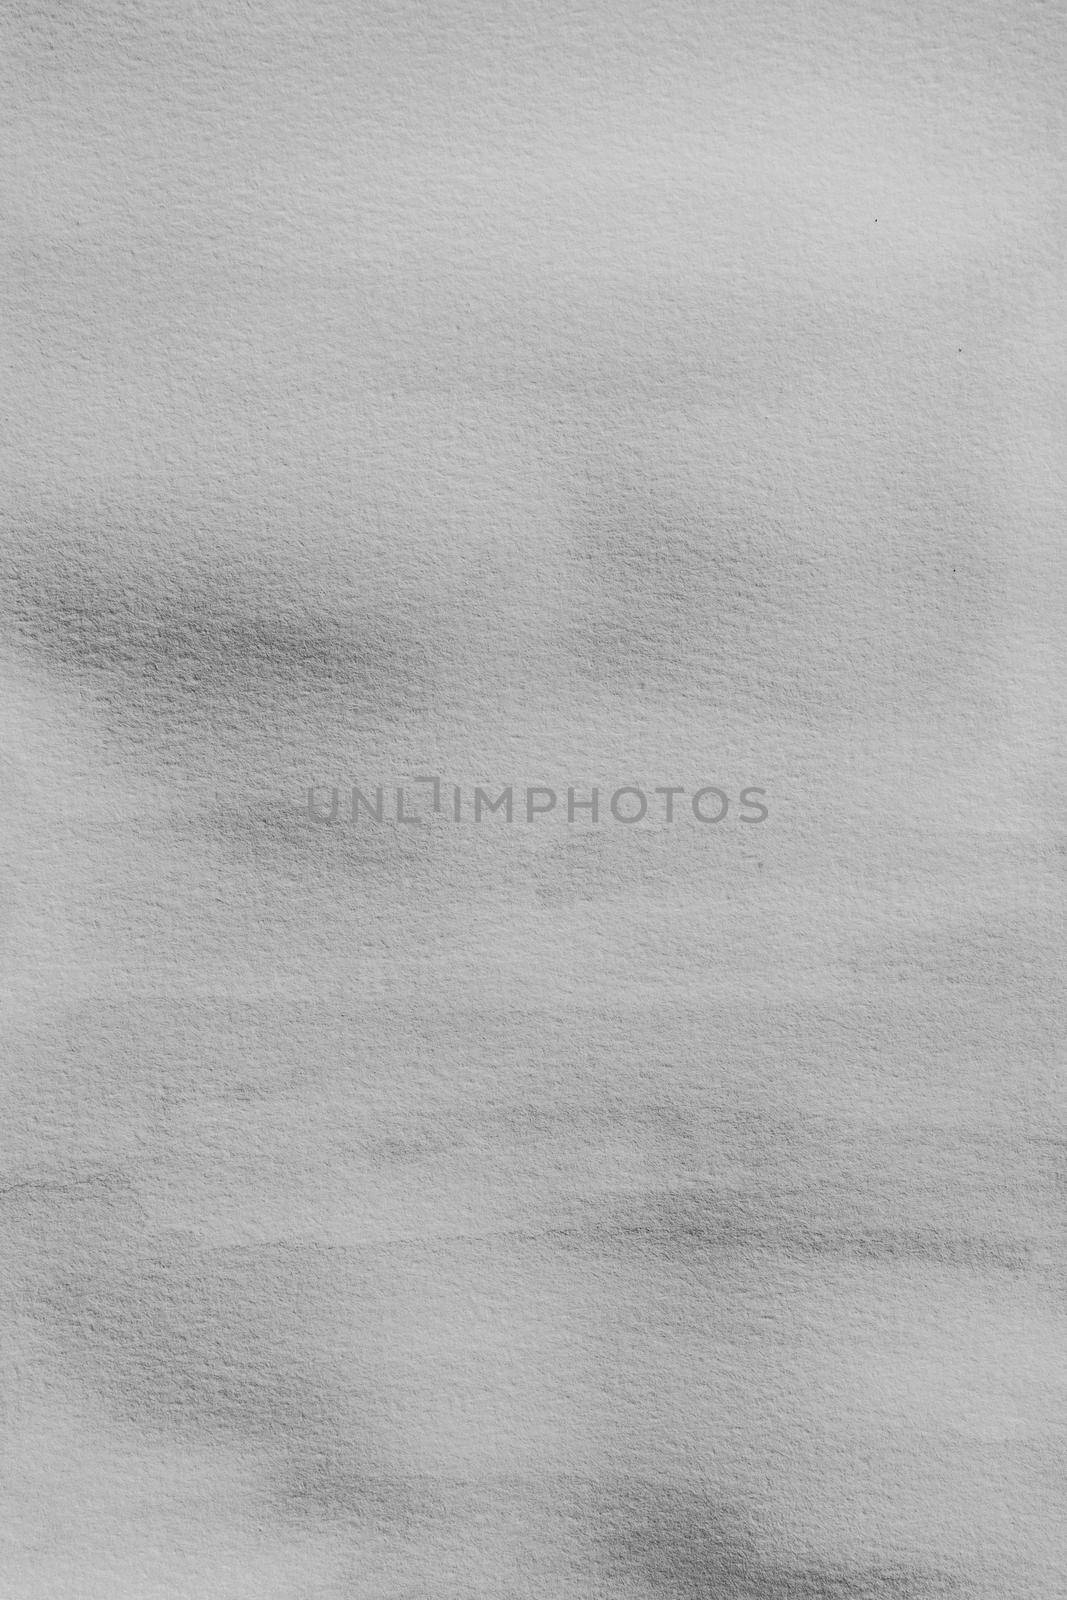 Abstract black and white watercolor on paper texture wallpaper background.